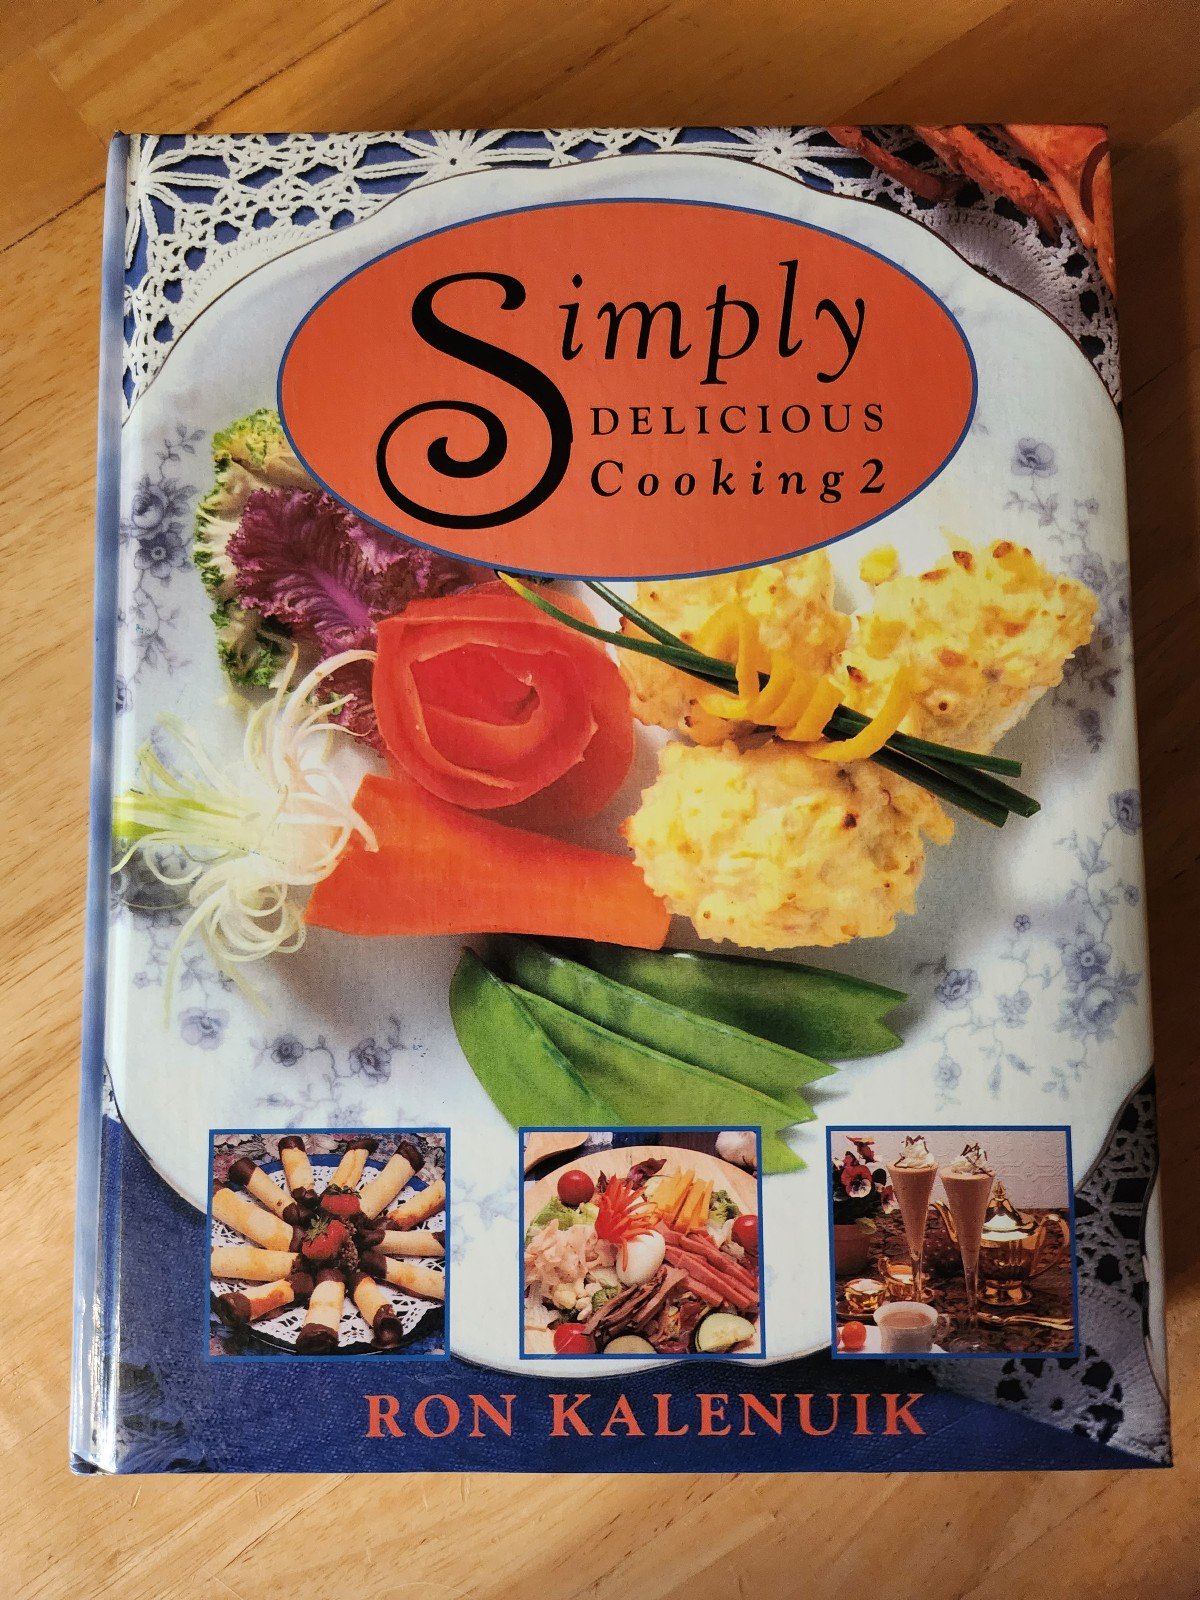 Simply Delicious Cooking 2 cookbook 5j24I80XY